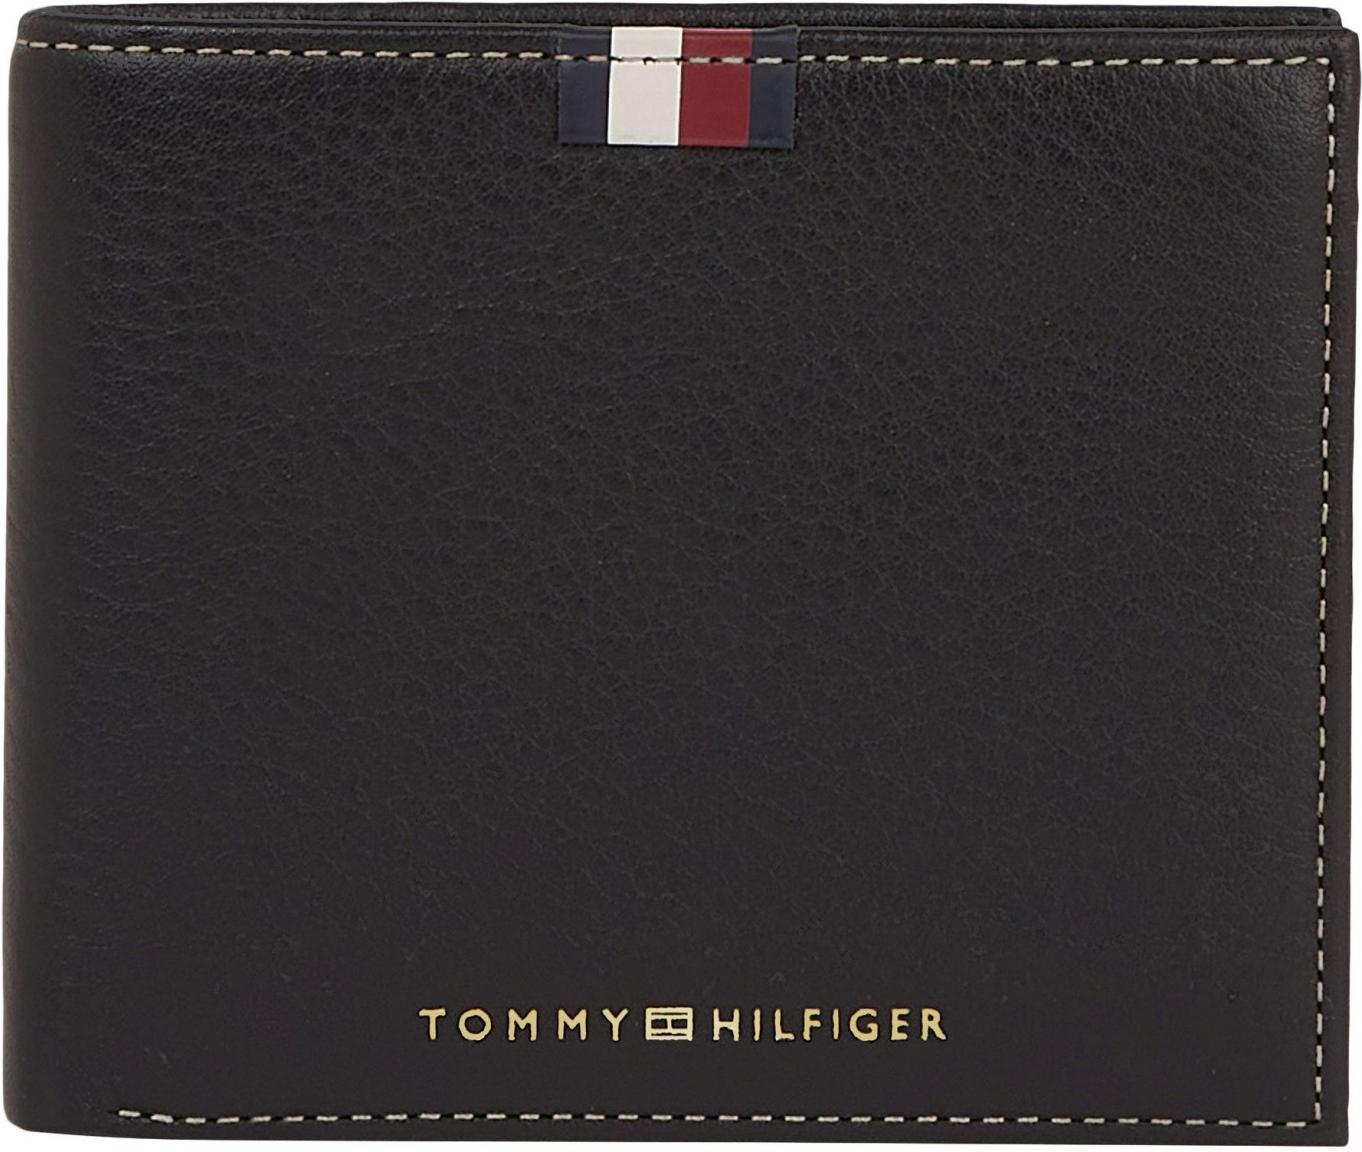 Dolllarvisit Tommy Hilfiger Leather Black  CC Flap and Coin 